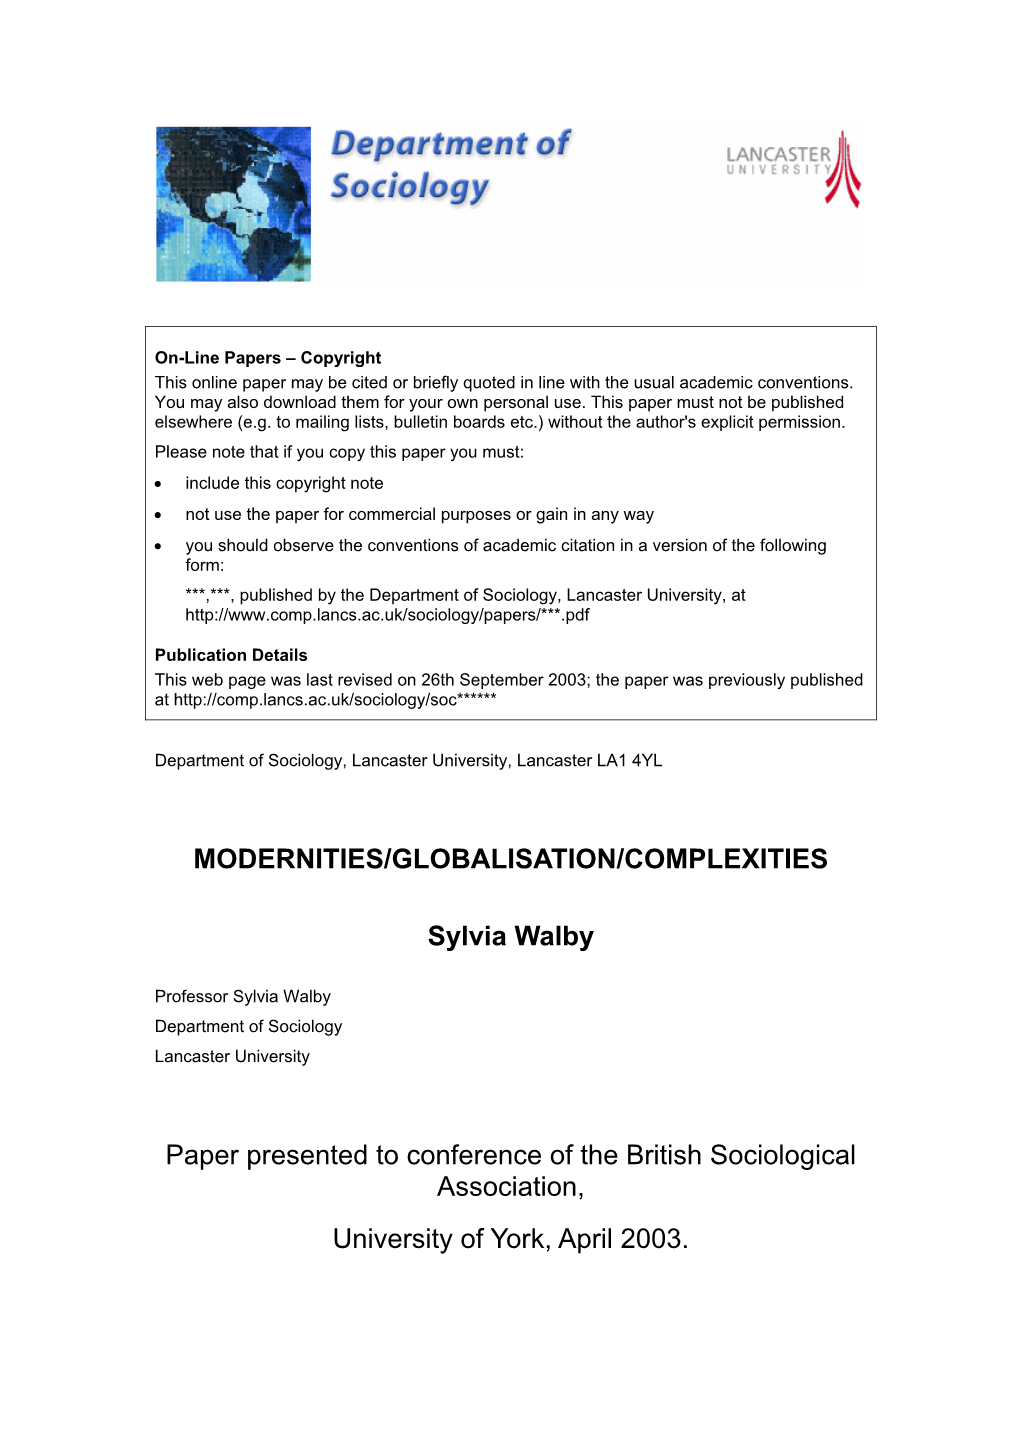 MODERNITIES/GLOBALISATION/COMPLEXITIES Sylvia Walby Paper Presented to Conference of the British Sociological Association, Univ